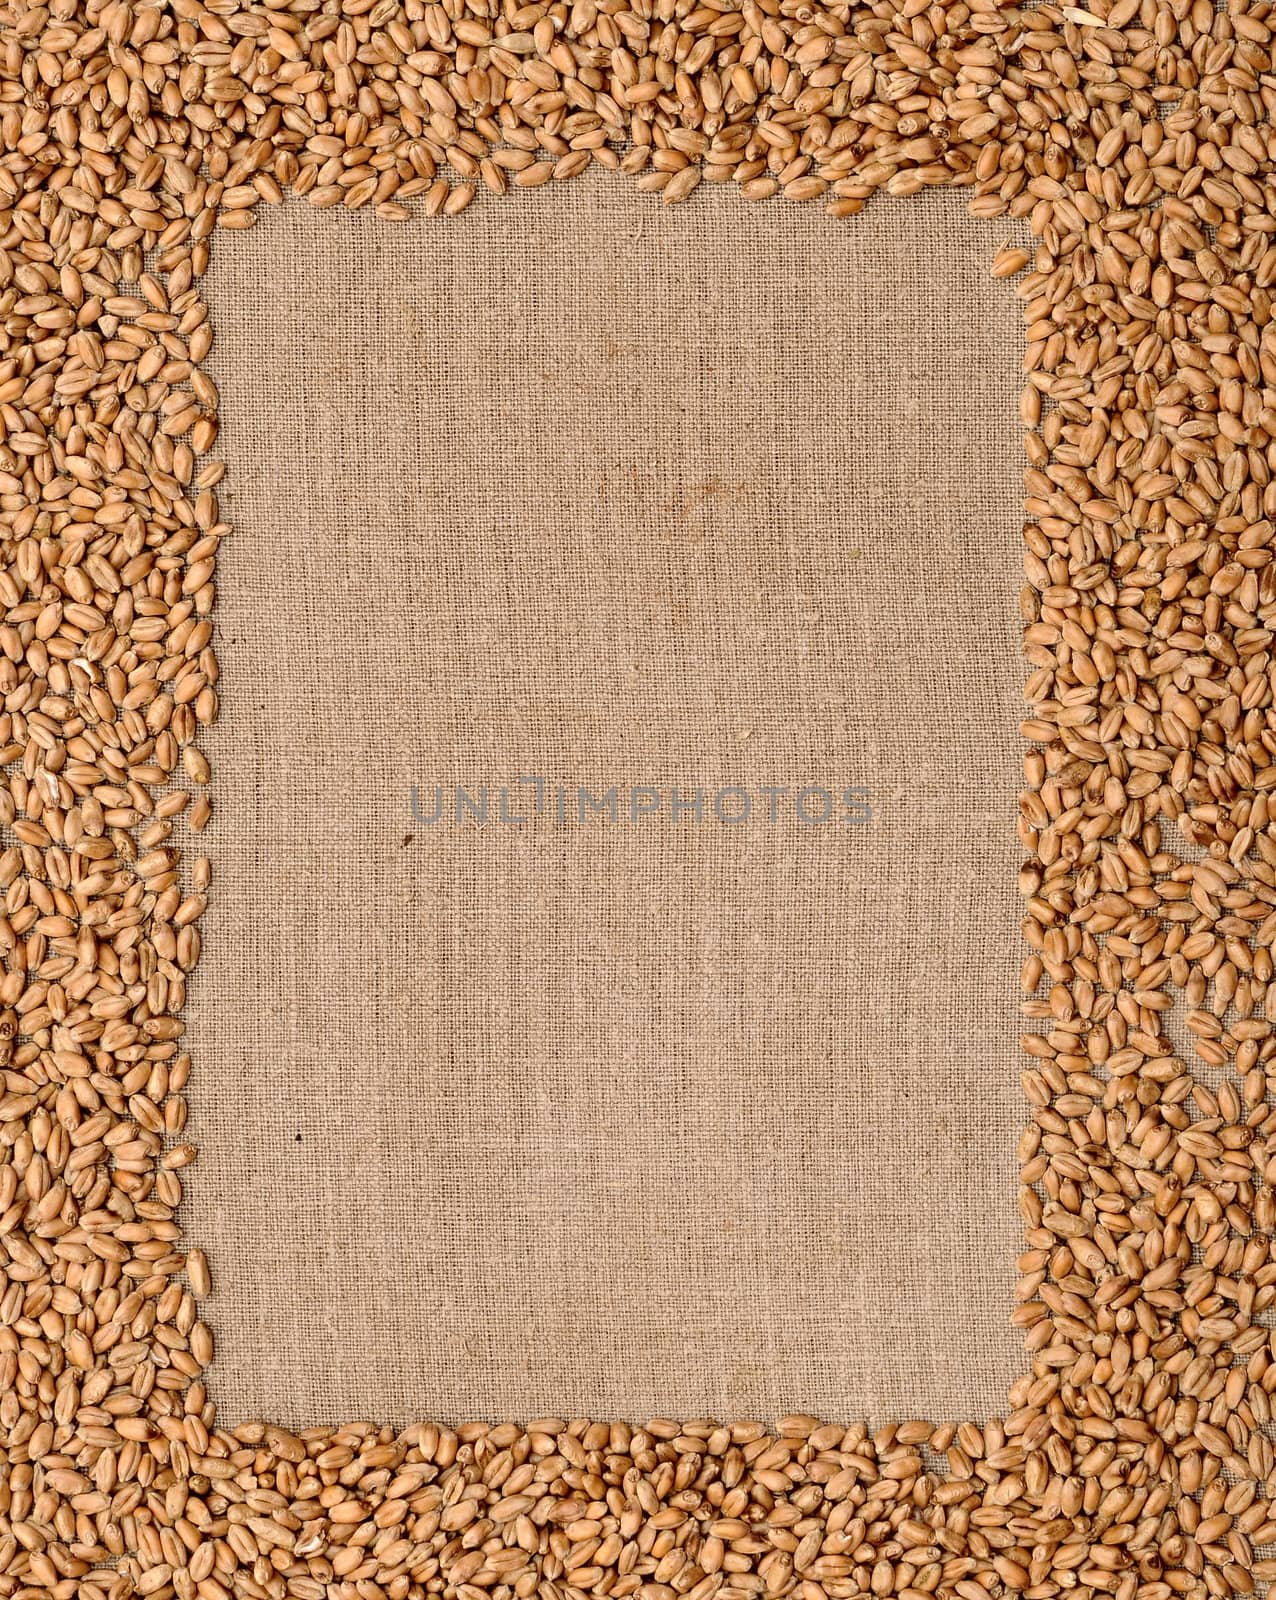 Wheat ears on rough sack material by inxti